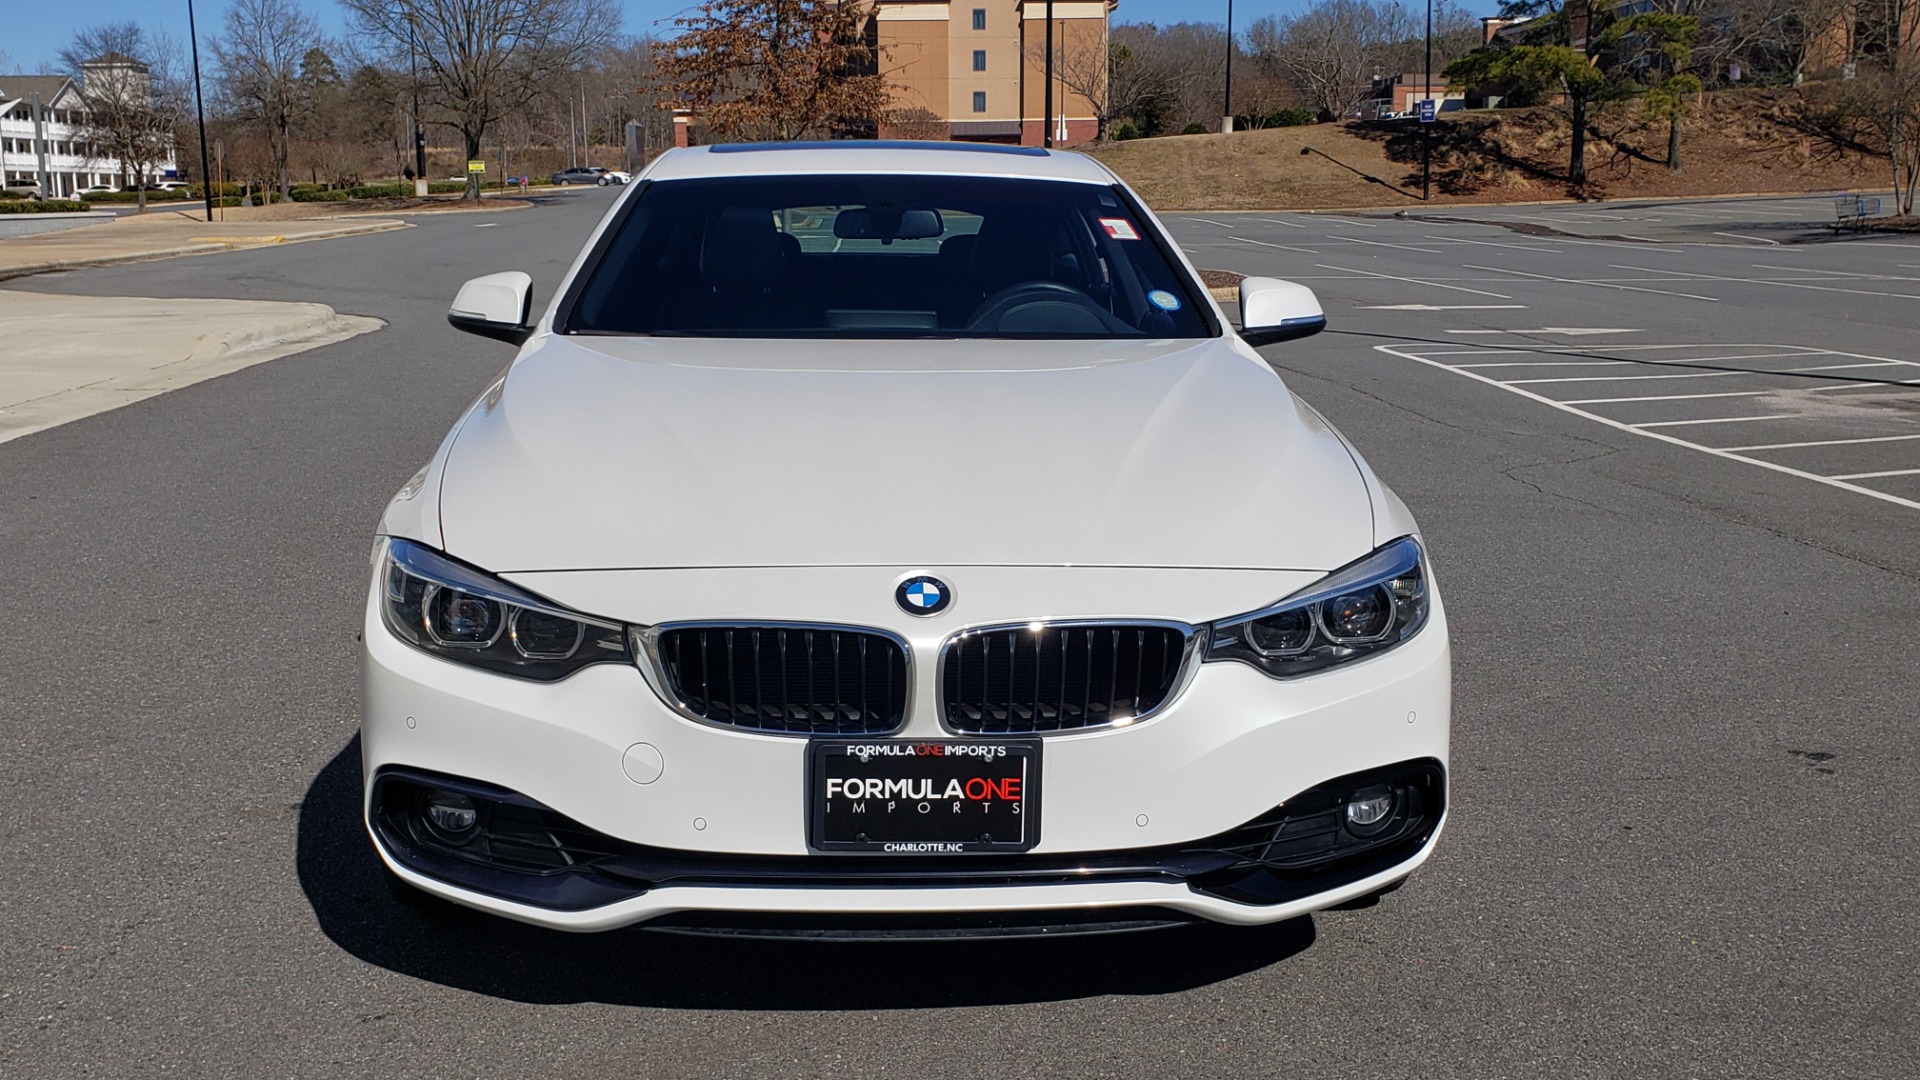 Used 2018 BMW 4 SERIES 430IXDRIVE / PREMIUM / NAV / SUNROOF / ESSENTIALS PKG for sale Sold at Formula Imports in Charlotte NC 28227 26